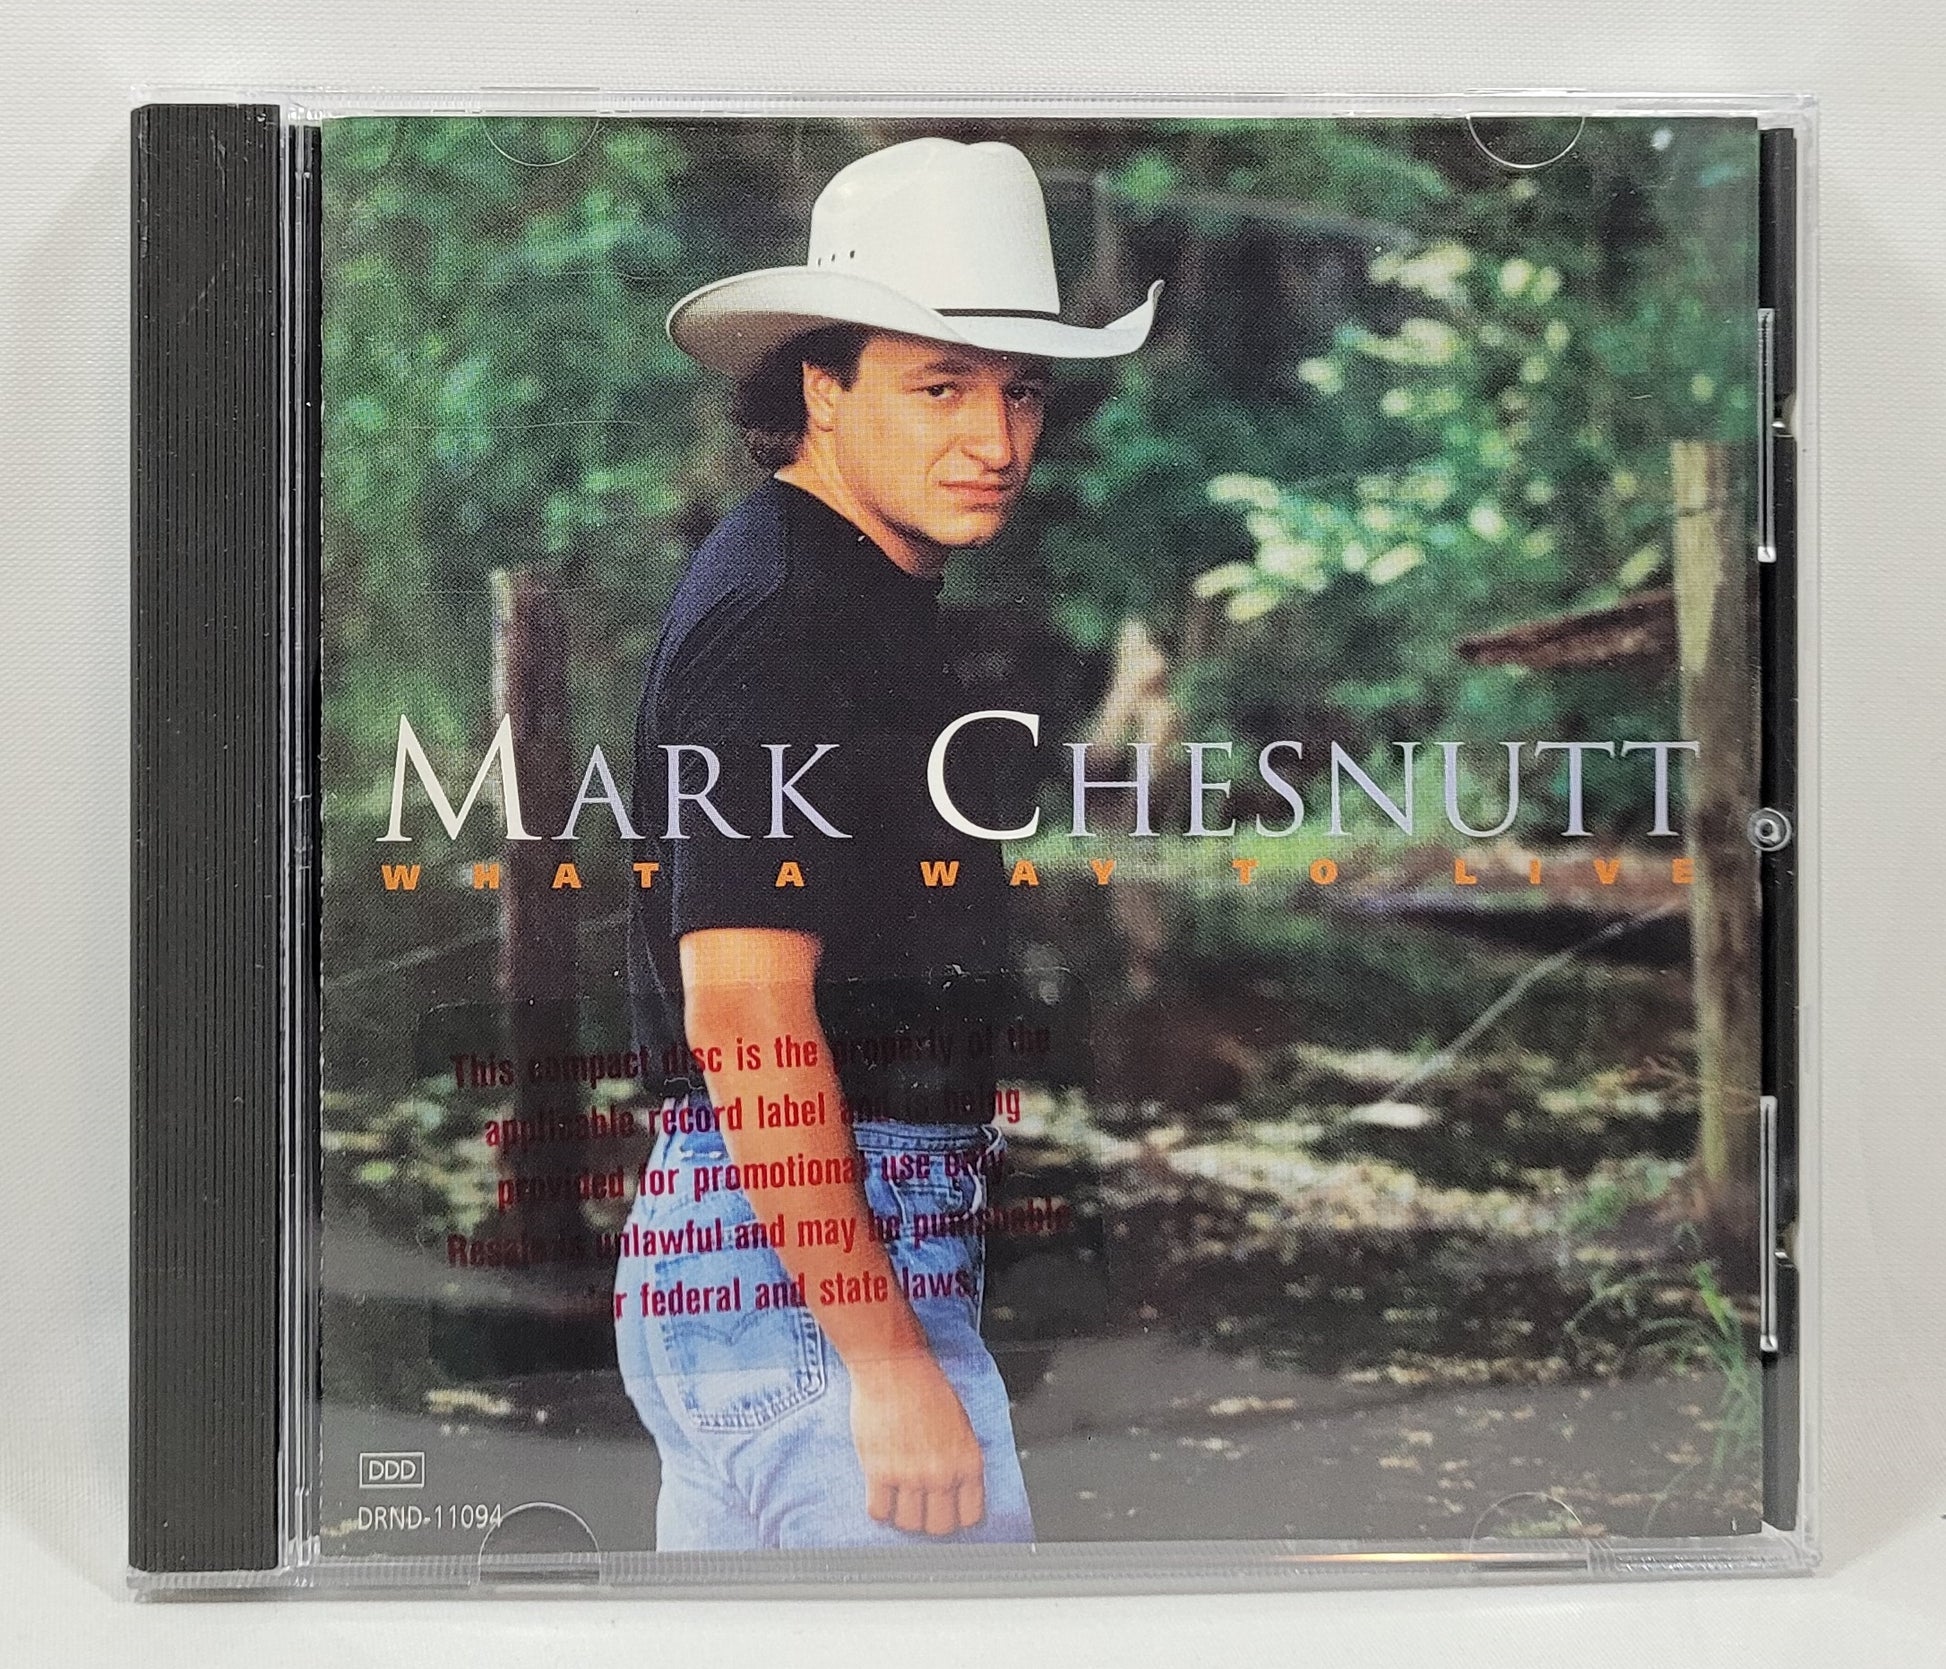 Mark Chesnutt - What a Way to Live [1994 Promo] [Used CD]